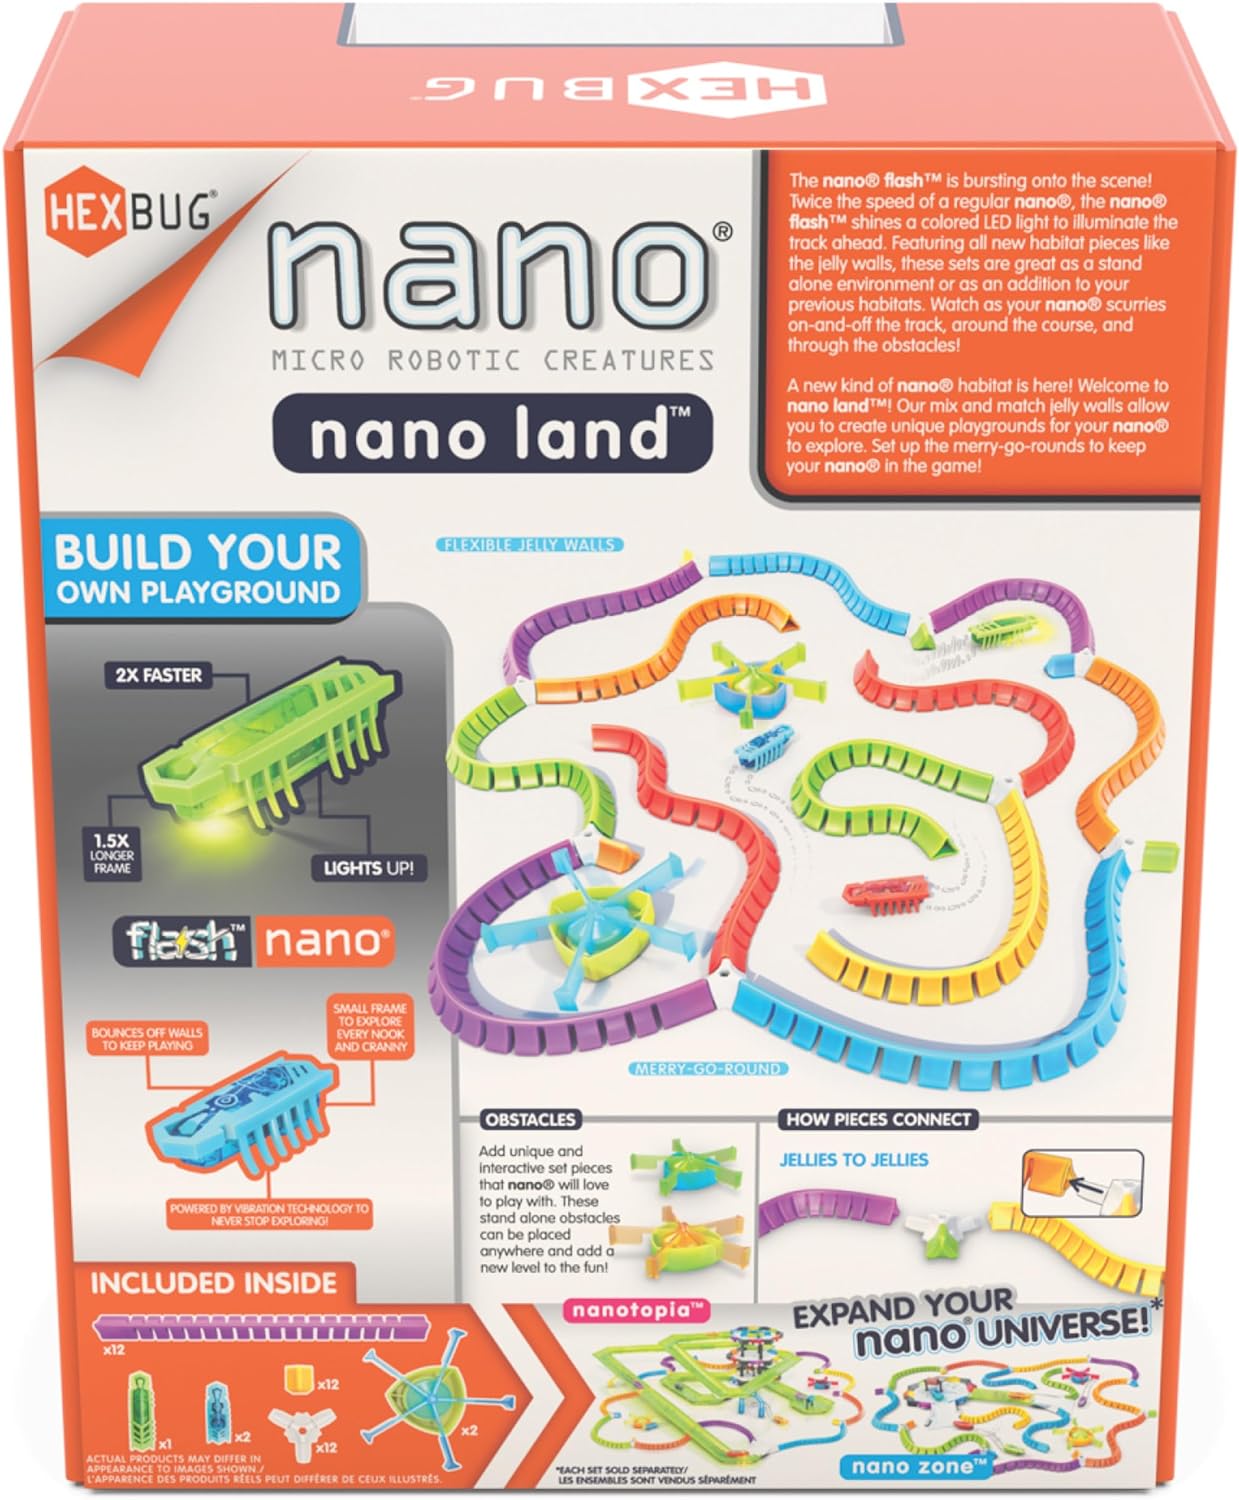 HEXBUG Flash Nano Nano Land - Colorful Sensory Playset for Kids - Mold Your own Playground - Over 40 Pieces and Batteries Included - Multicolor